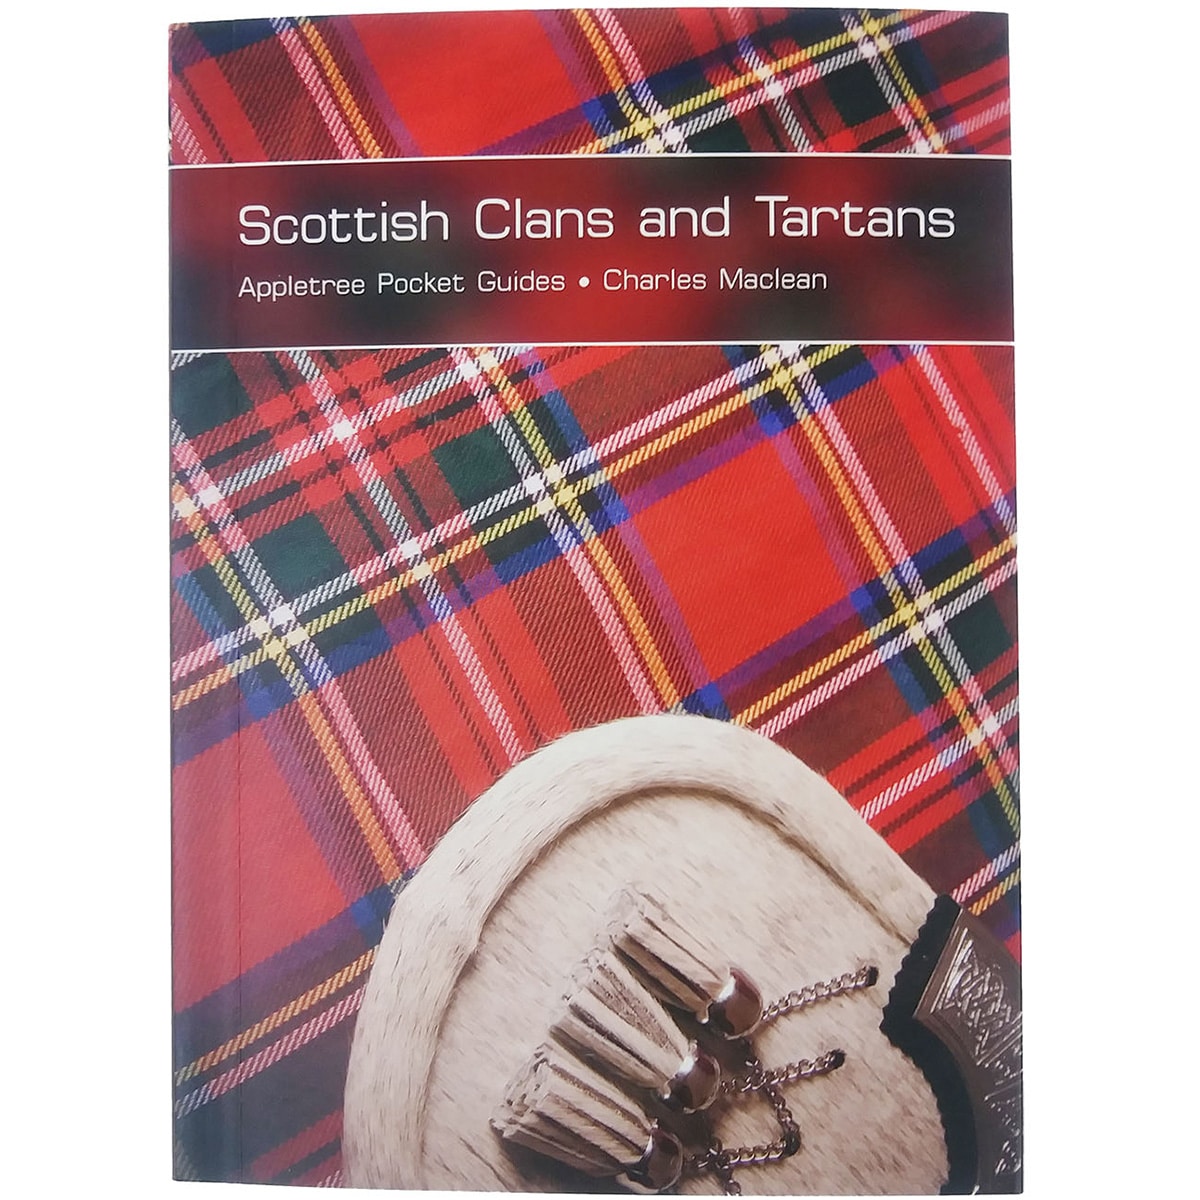 The Scottish Clans and Tartans book from The Celtic Croft.